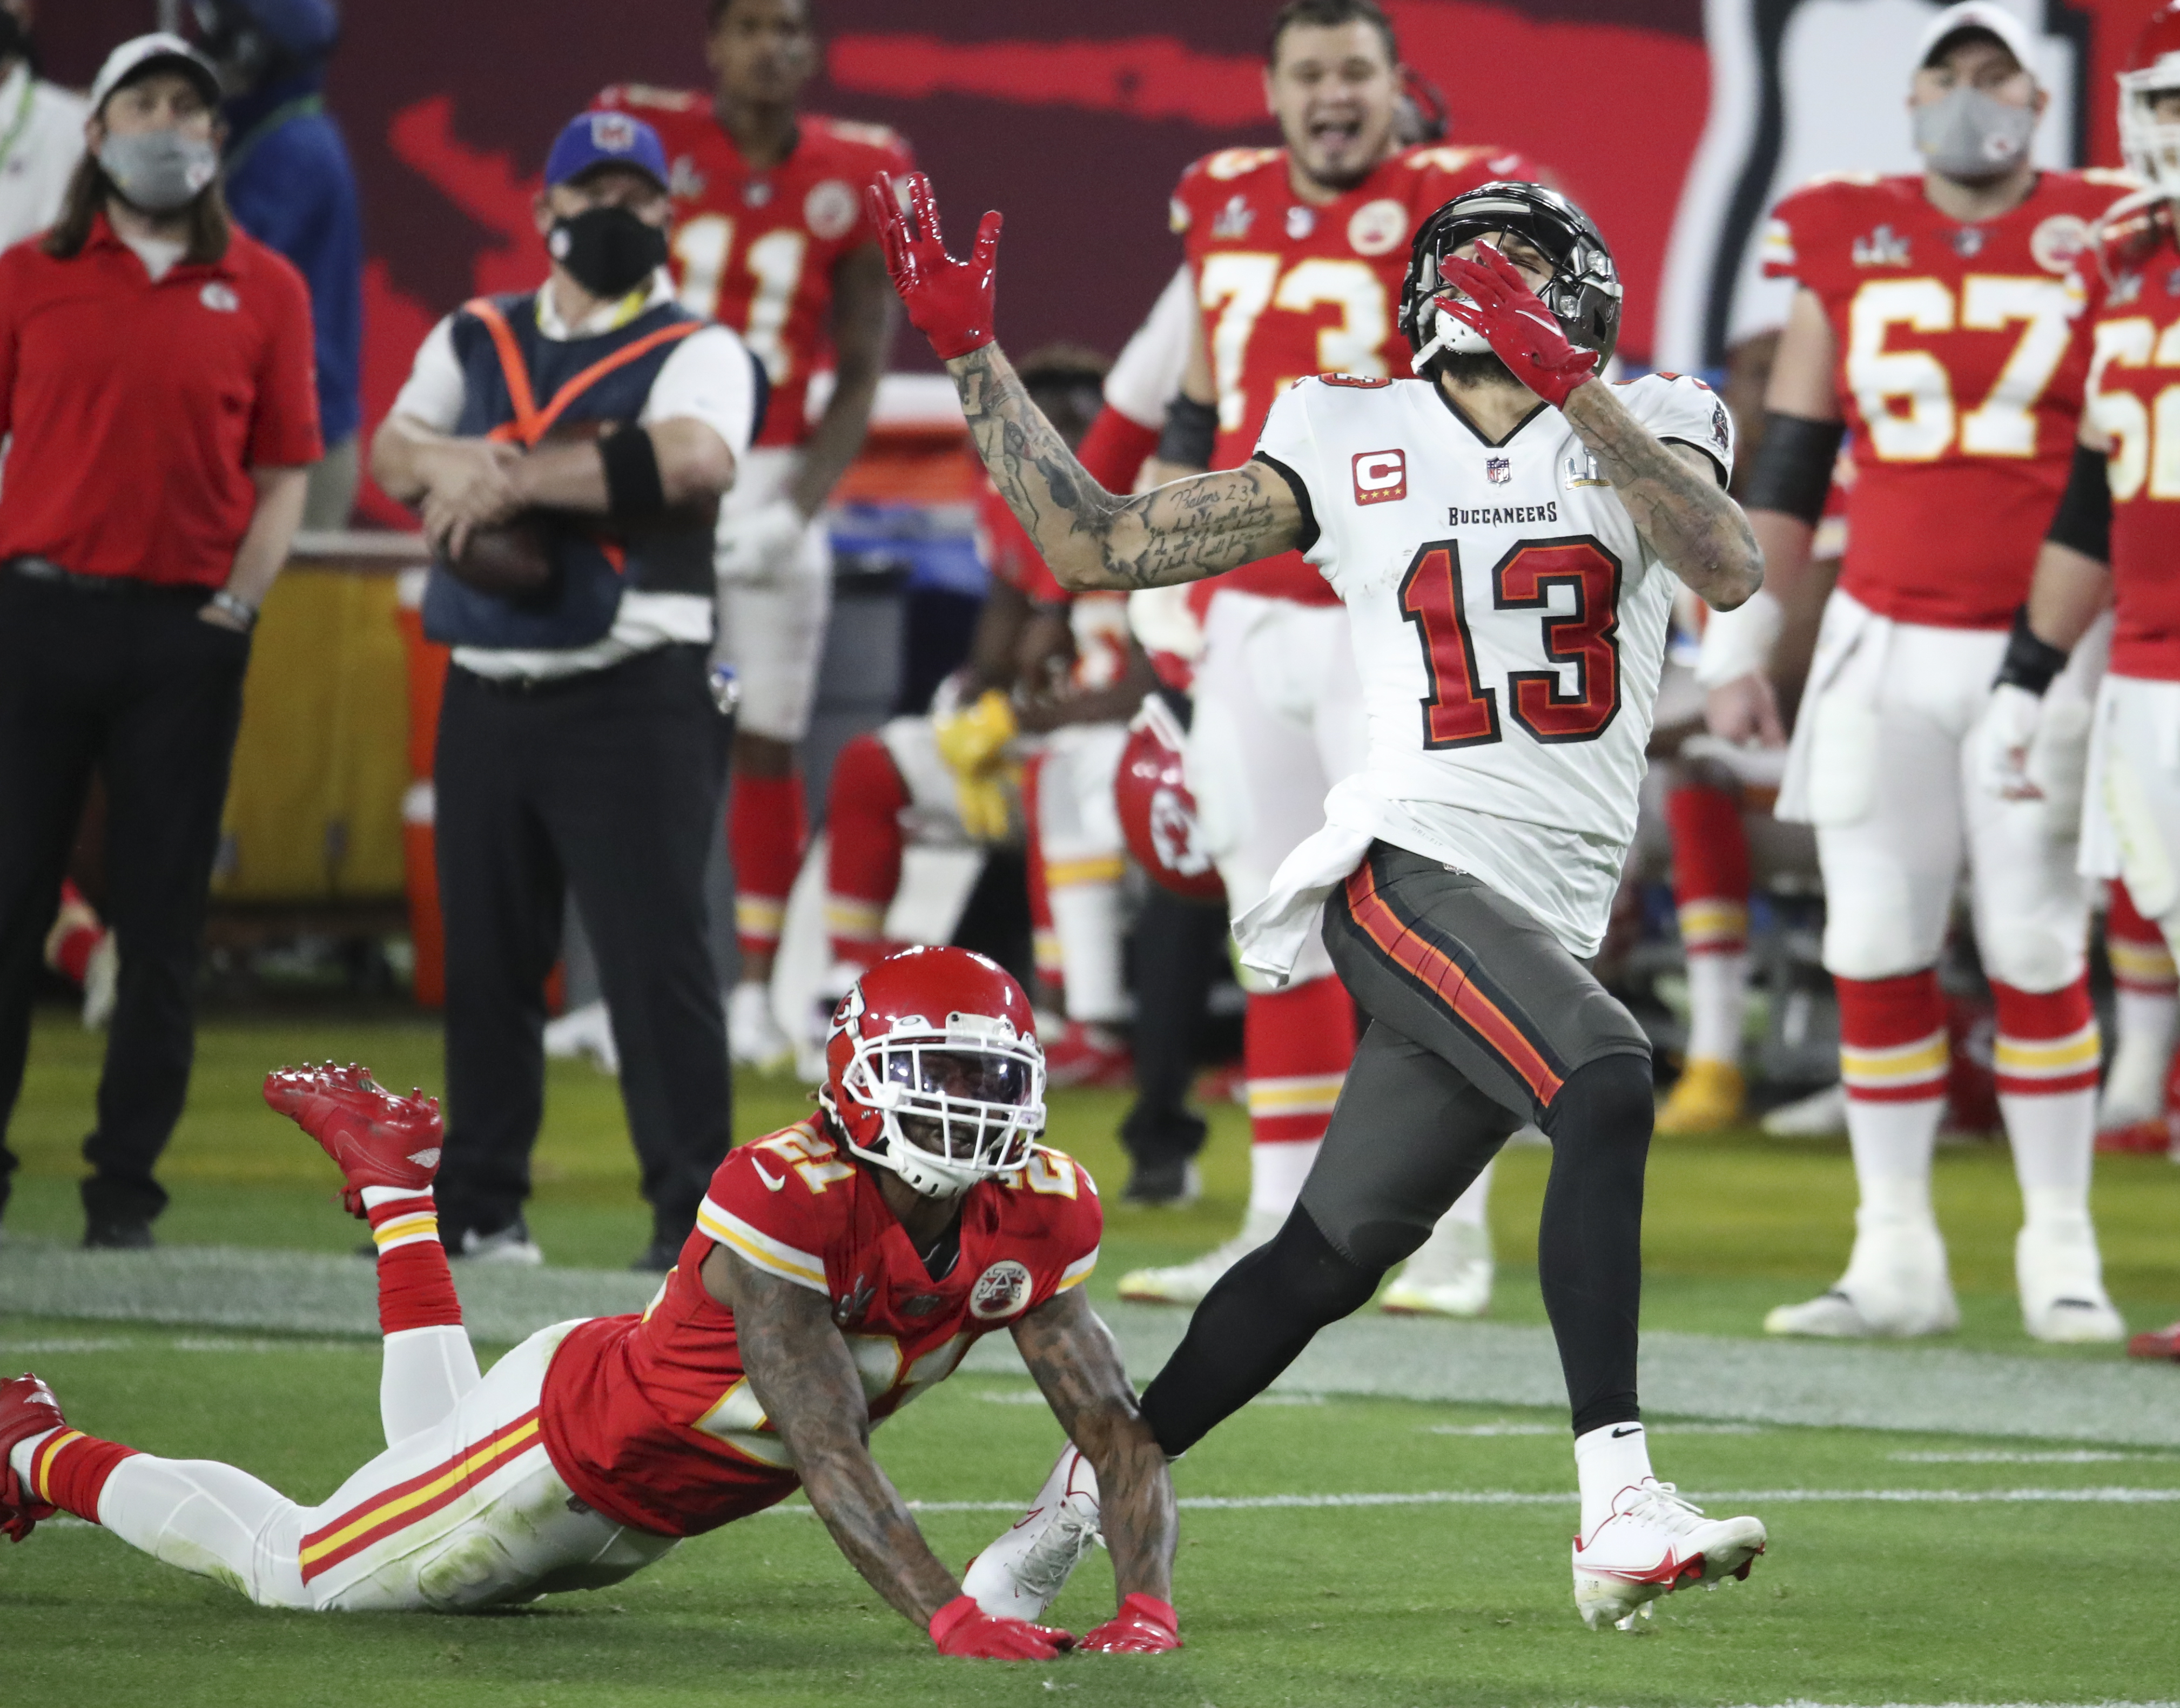 Watch: Relive the Buccaneers Super Bowl Victory Over the Chiefs